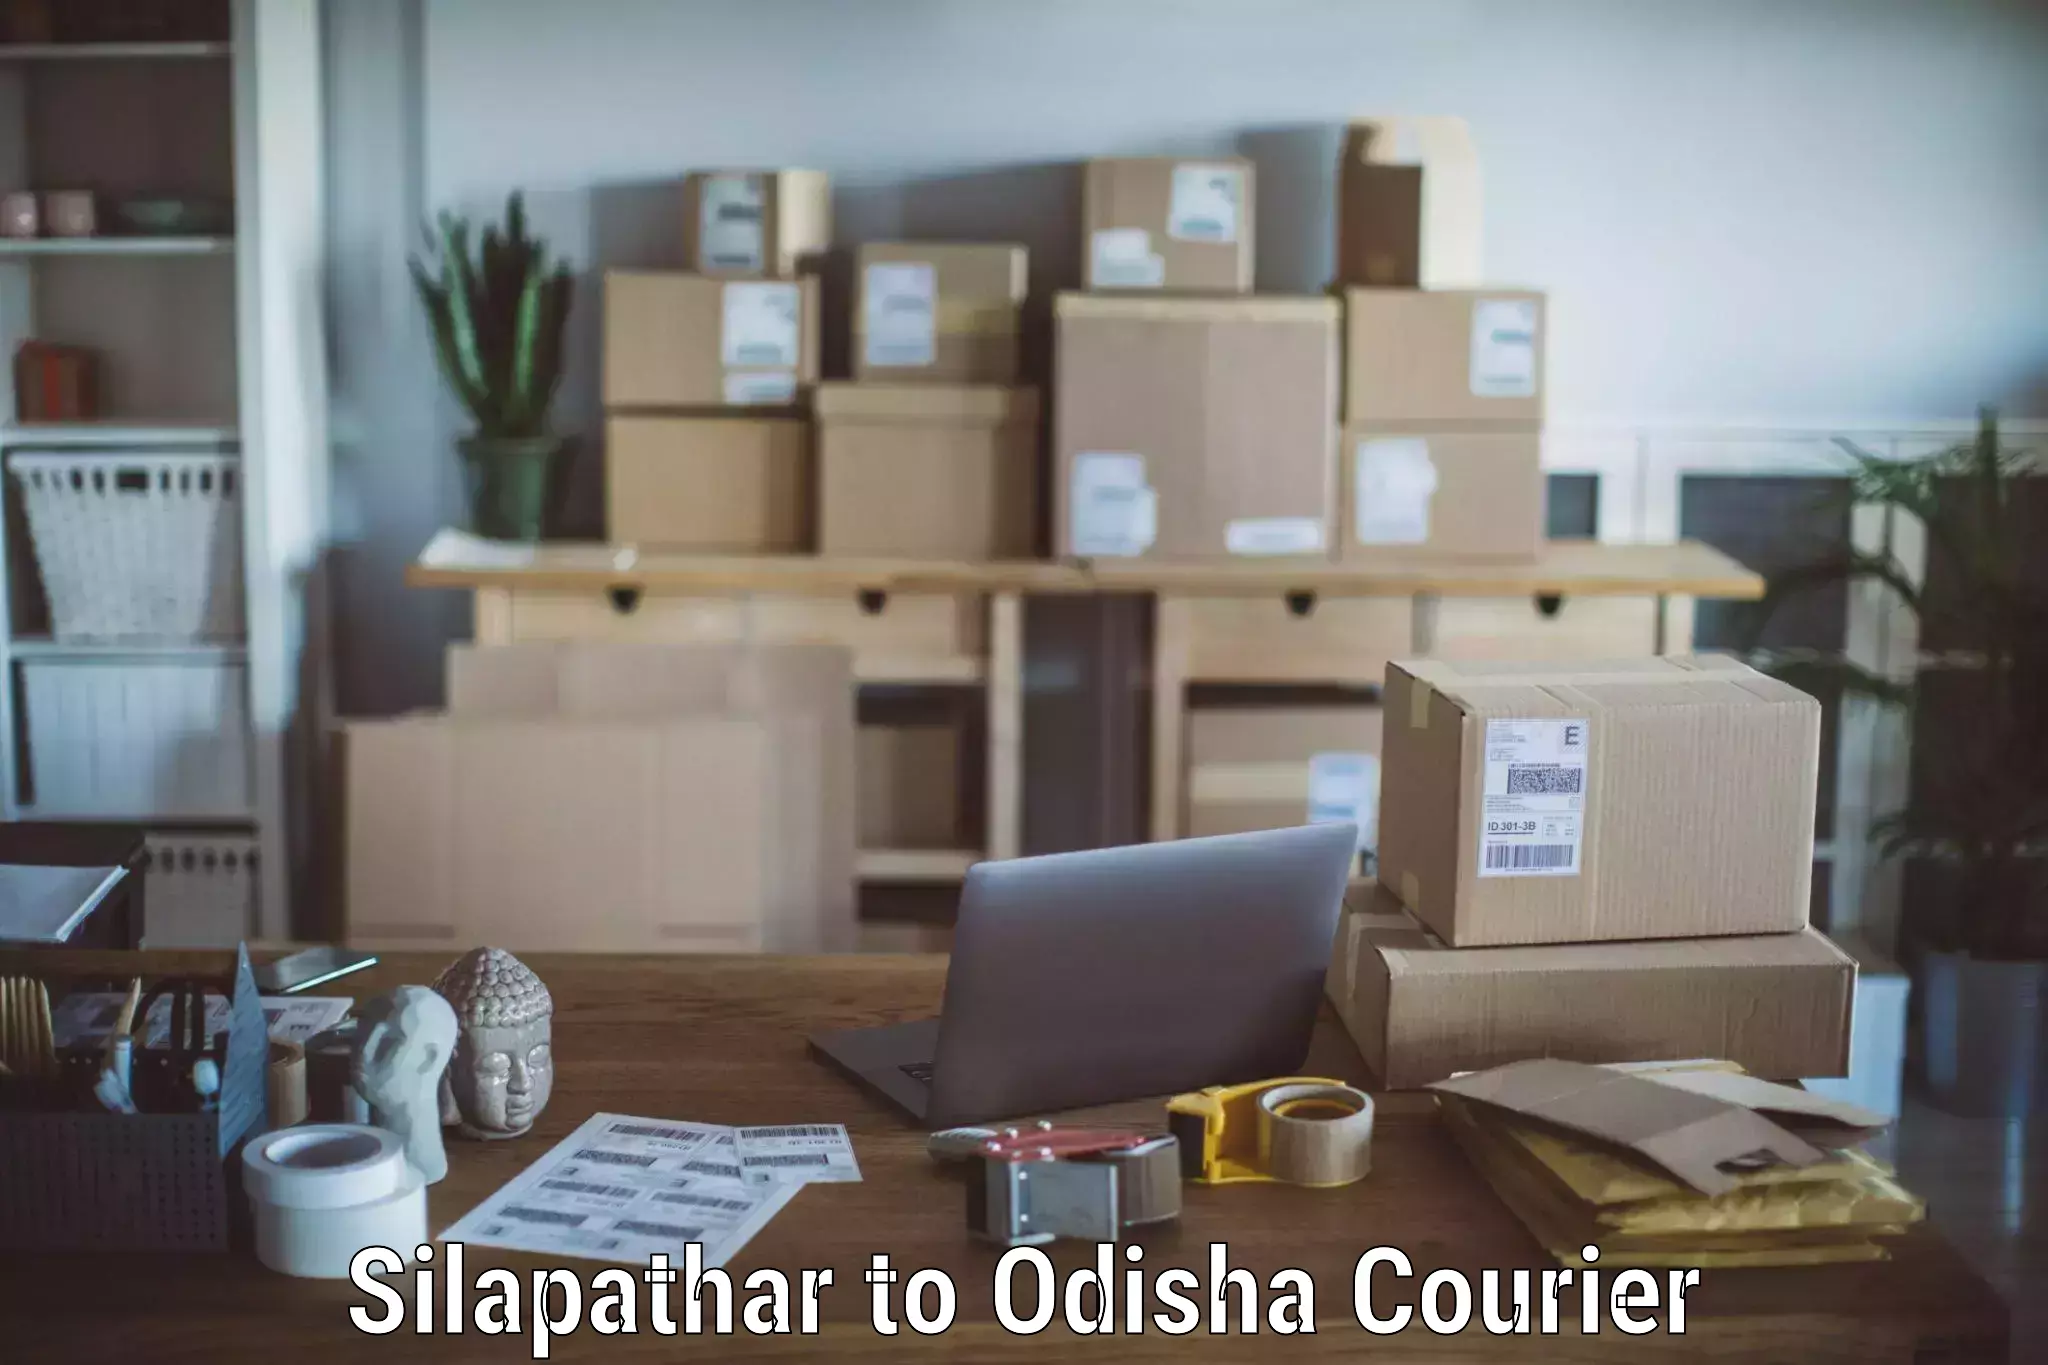 Residential moving experts Silapathar to Talcher